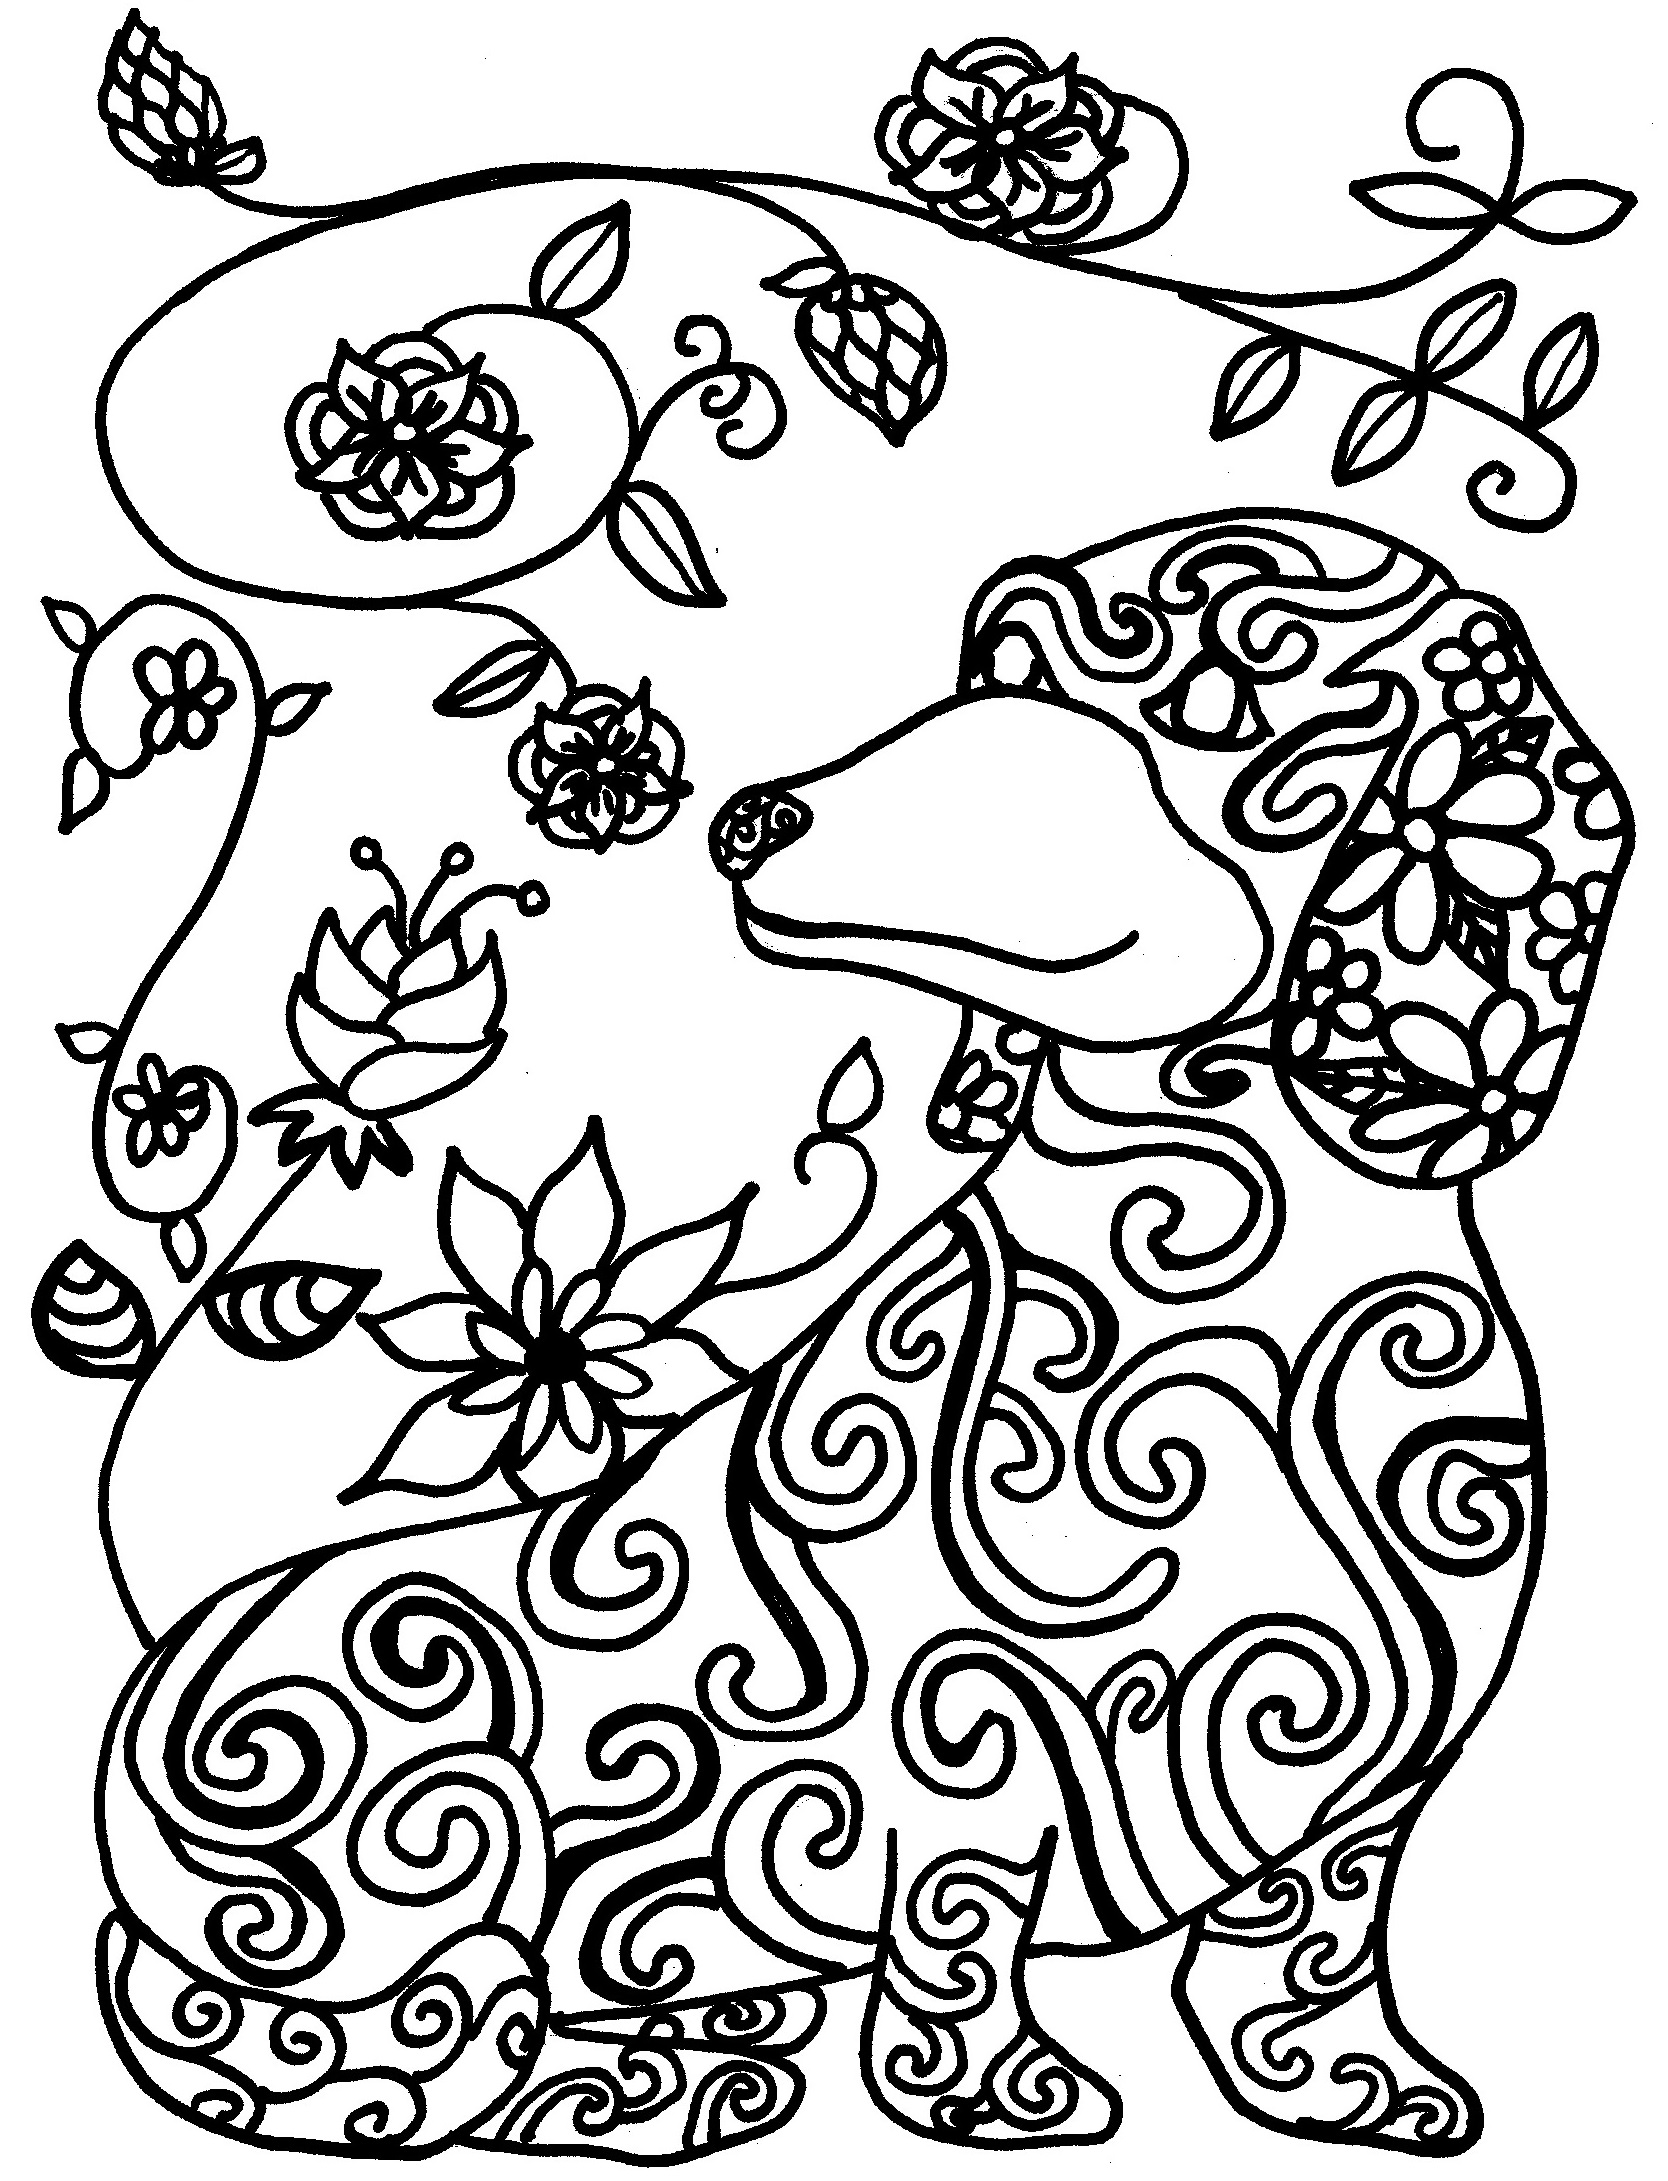 Dachshund Coloring Page - Creative Lee Made Arts and Crafts